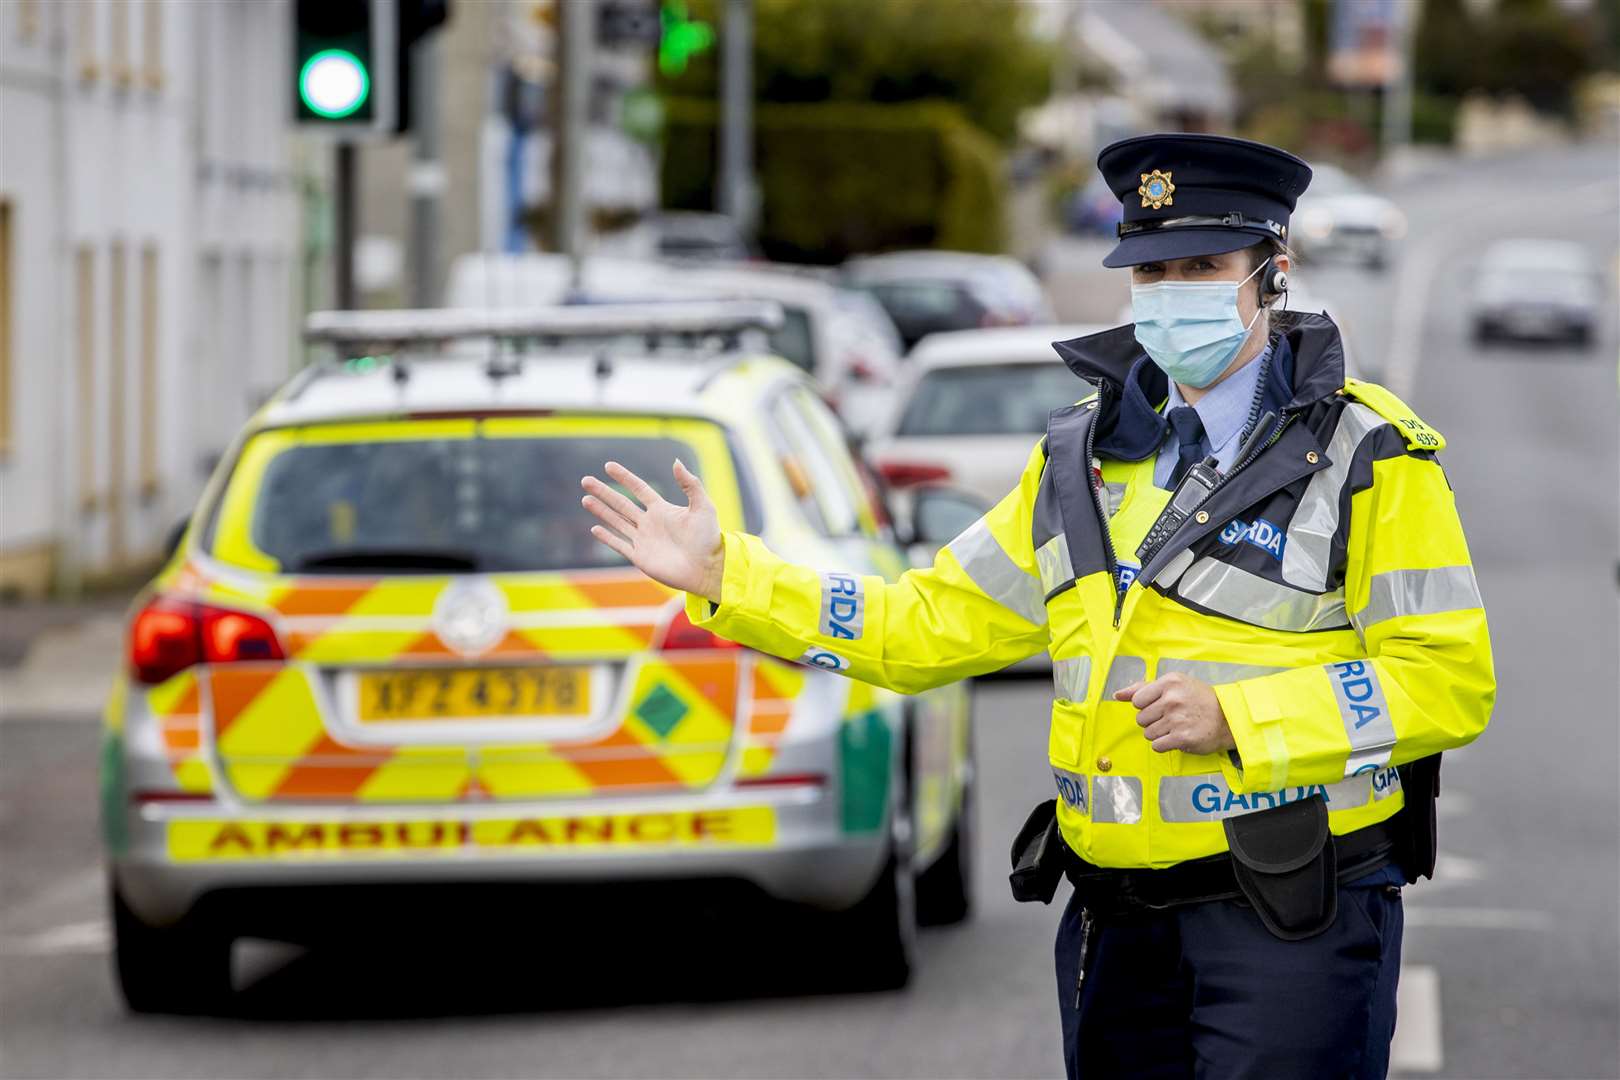 Members of An Garda Siochana performing random vehicle checks in the village of Muff, County Donegal, on the border with Northern Ireland (Liam McBurney/PA)